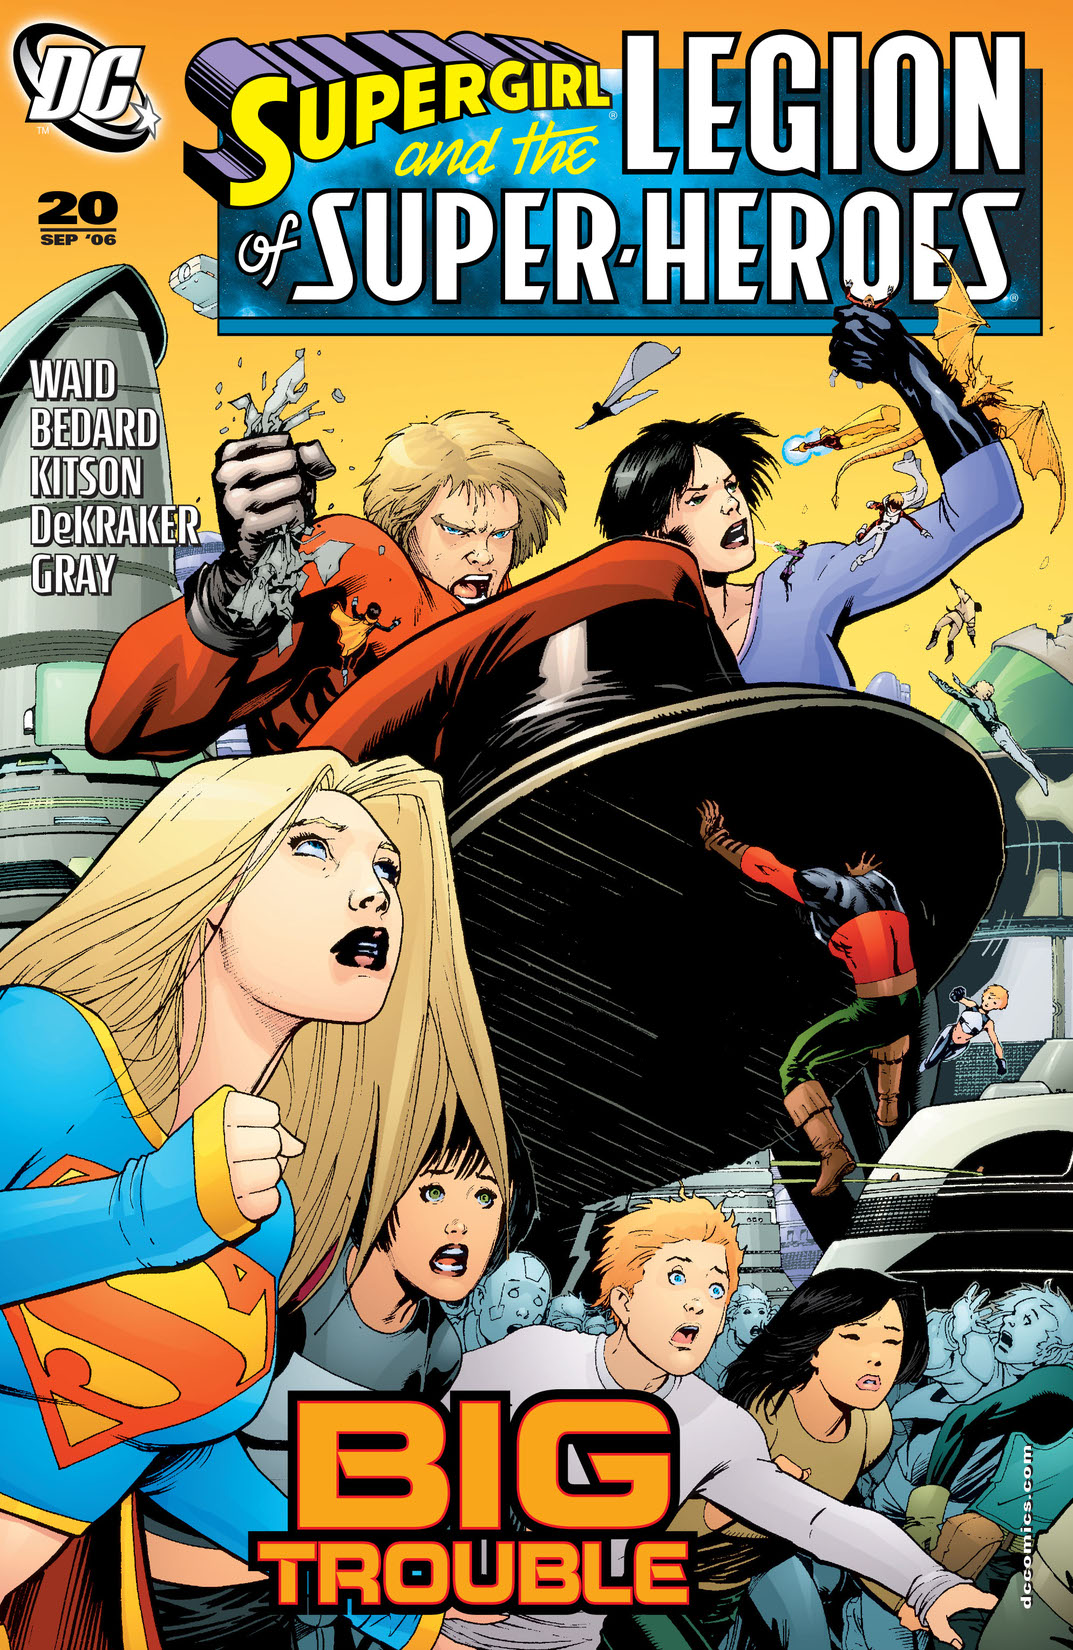 Supergirl and The Legion of Super-Heroes (2006-) #20 preview images